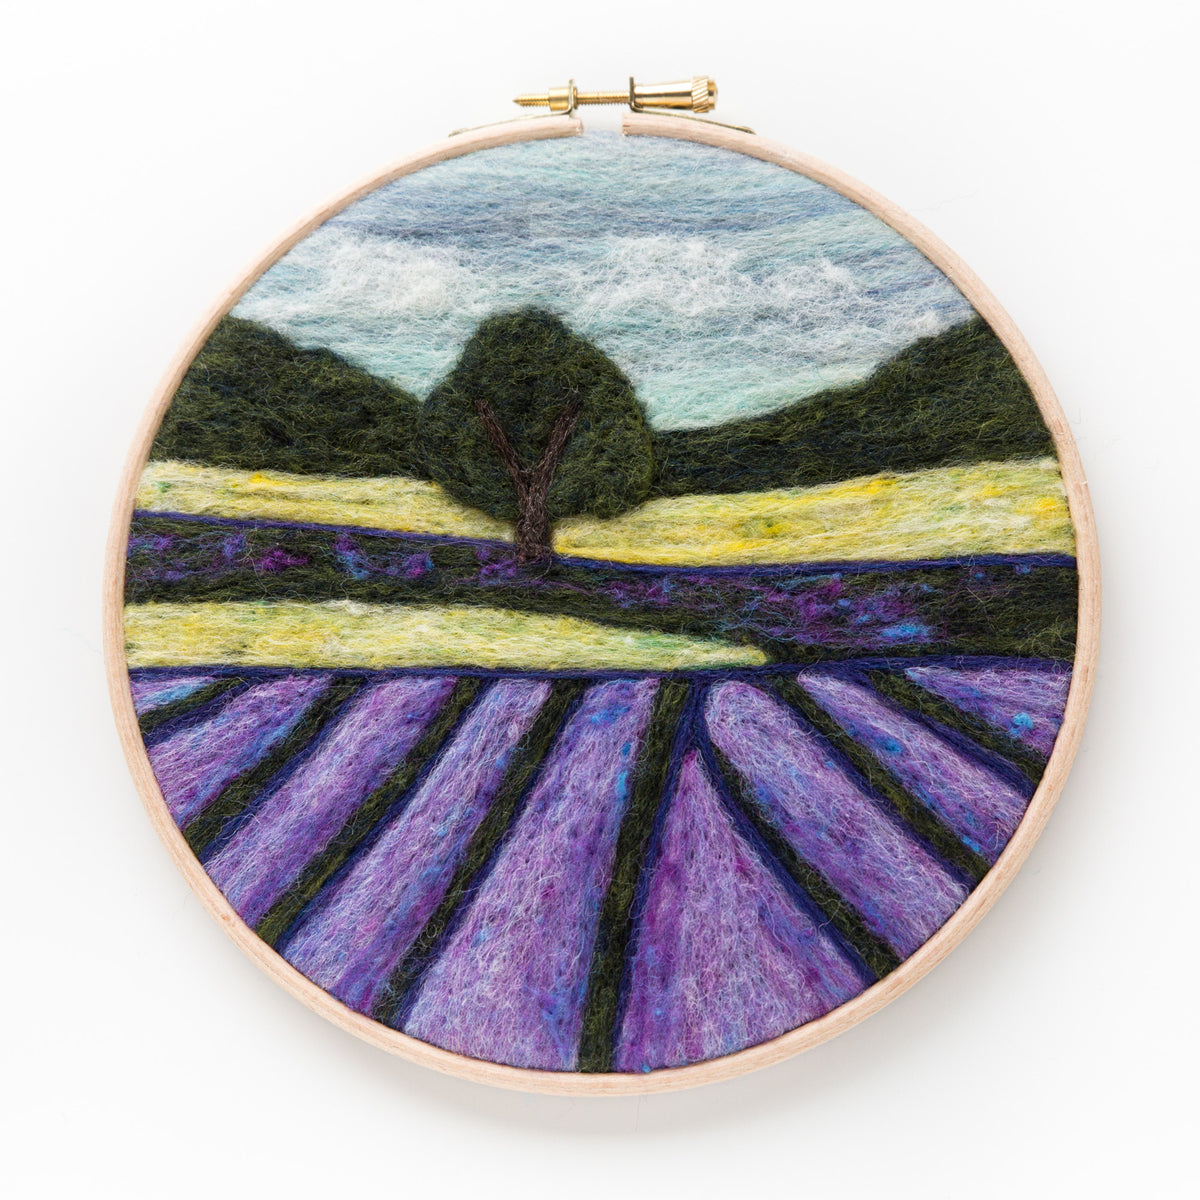 Lavender Fields Needle Felting Kit - Landscape Painting with Wool– Felted  Sky